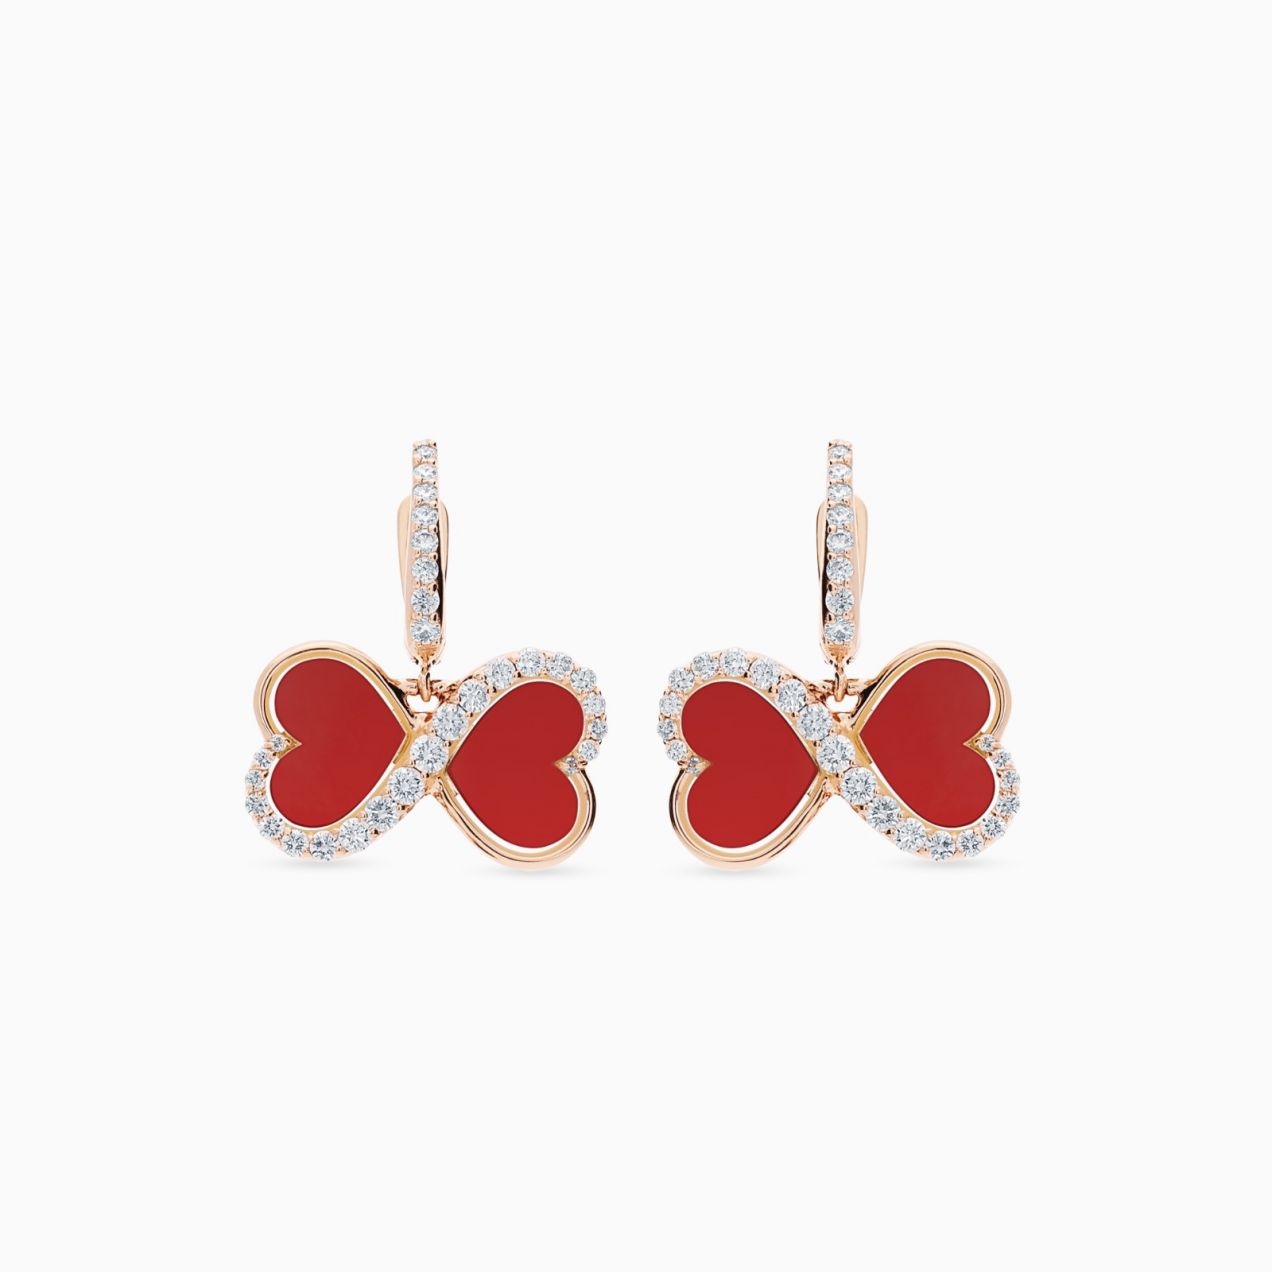 Rose gold infinity symbol earrings with heart-cut coral and diamonds